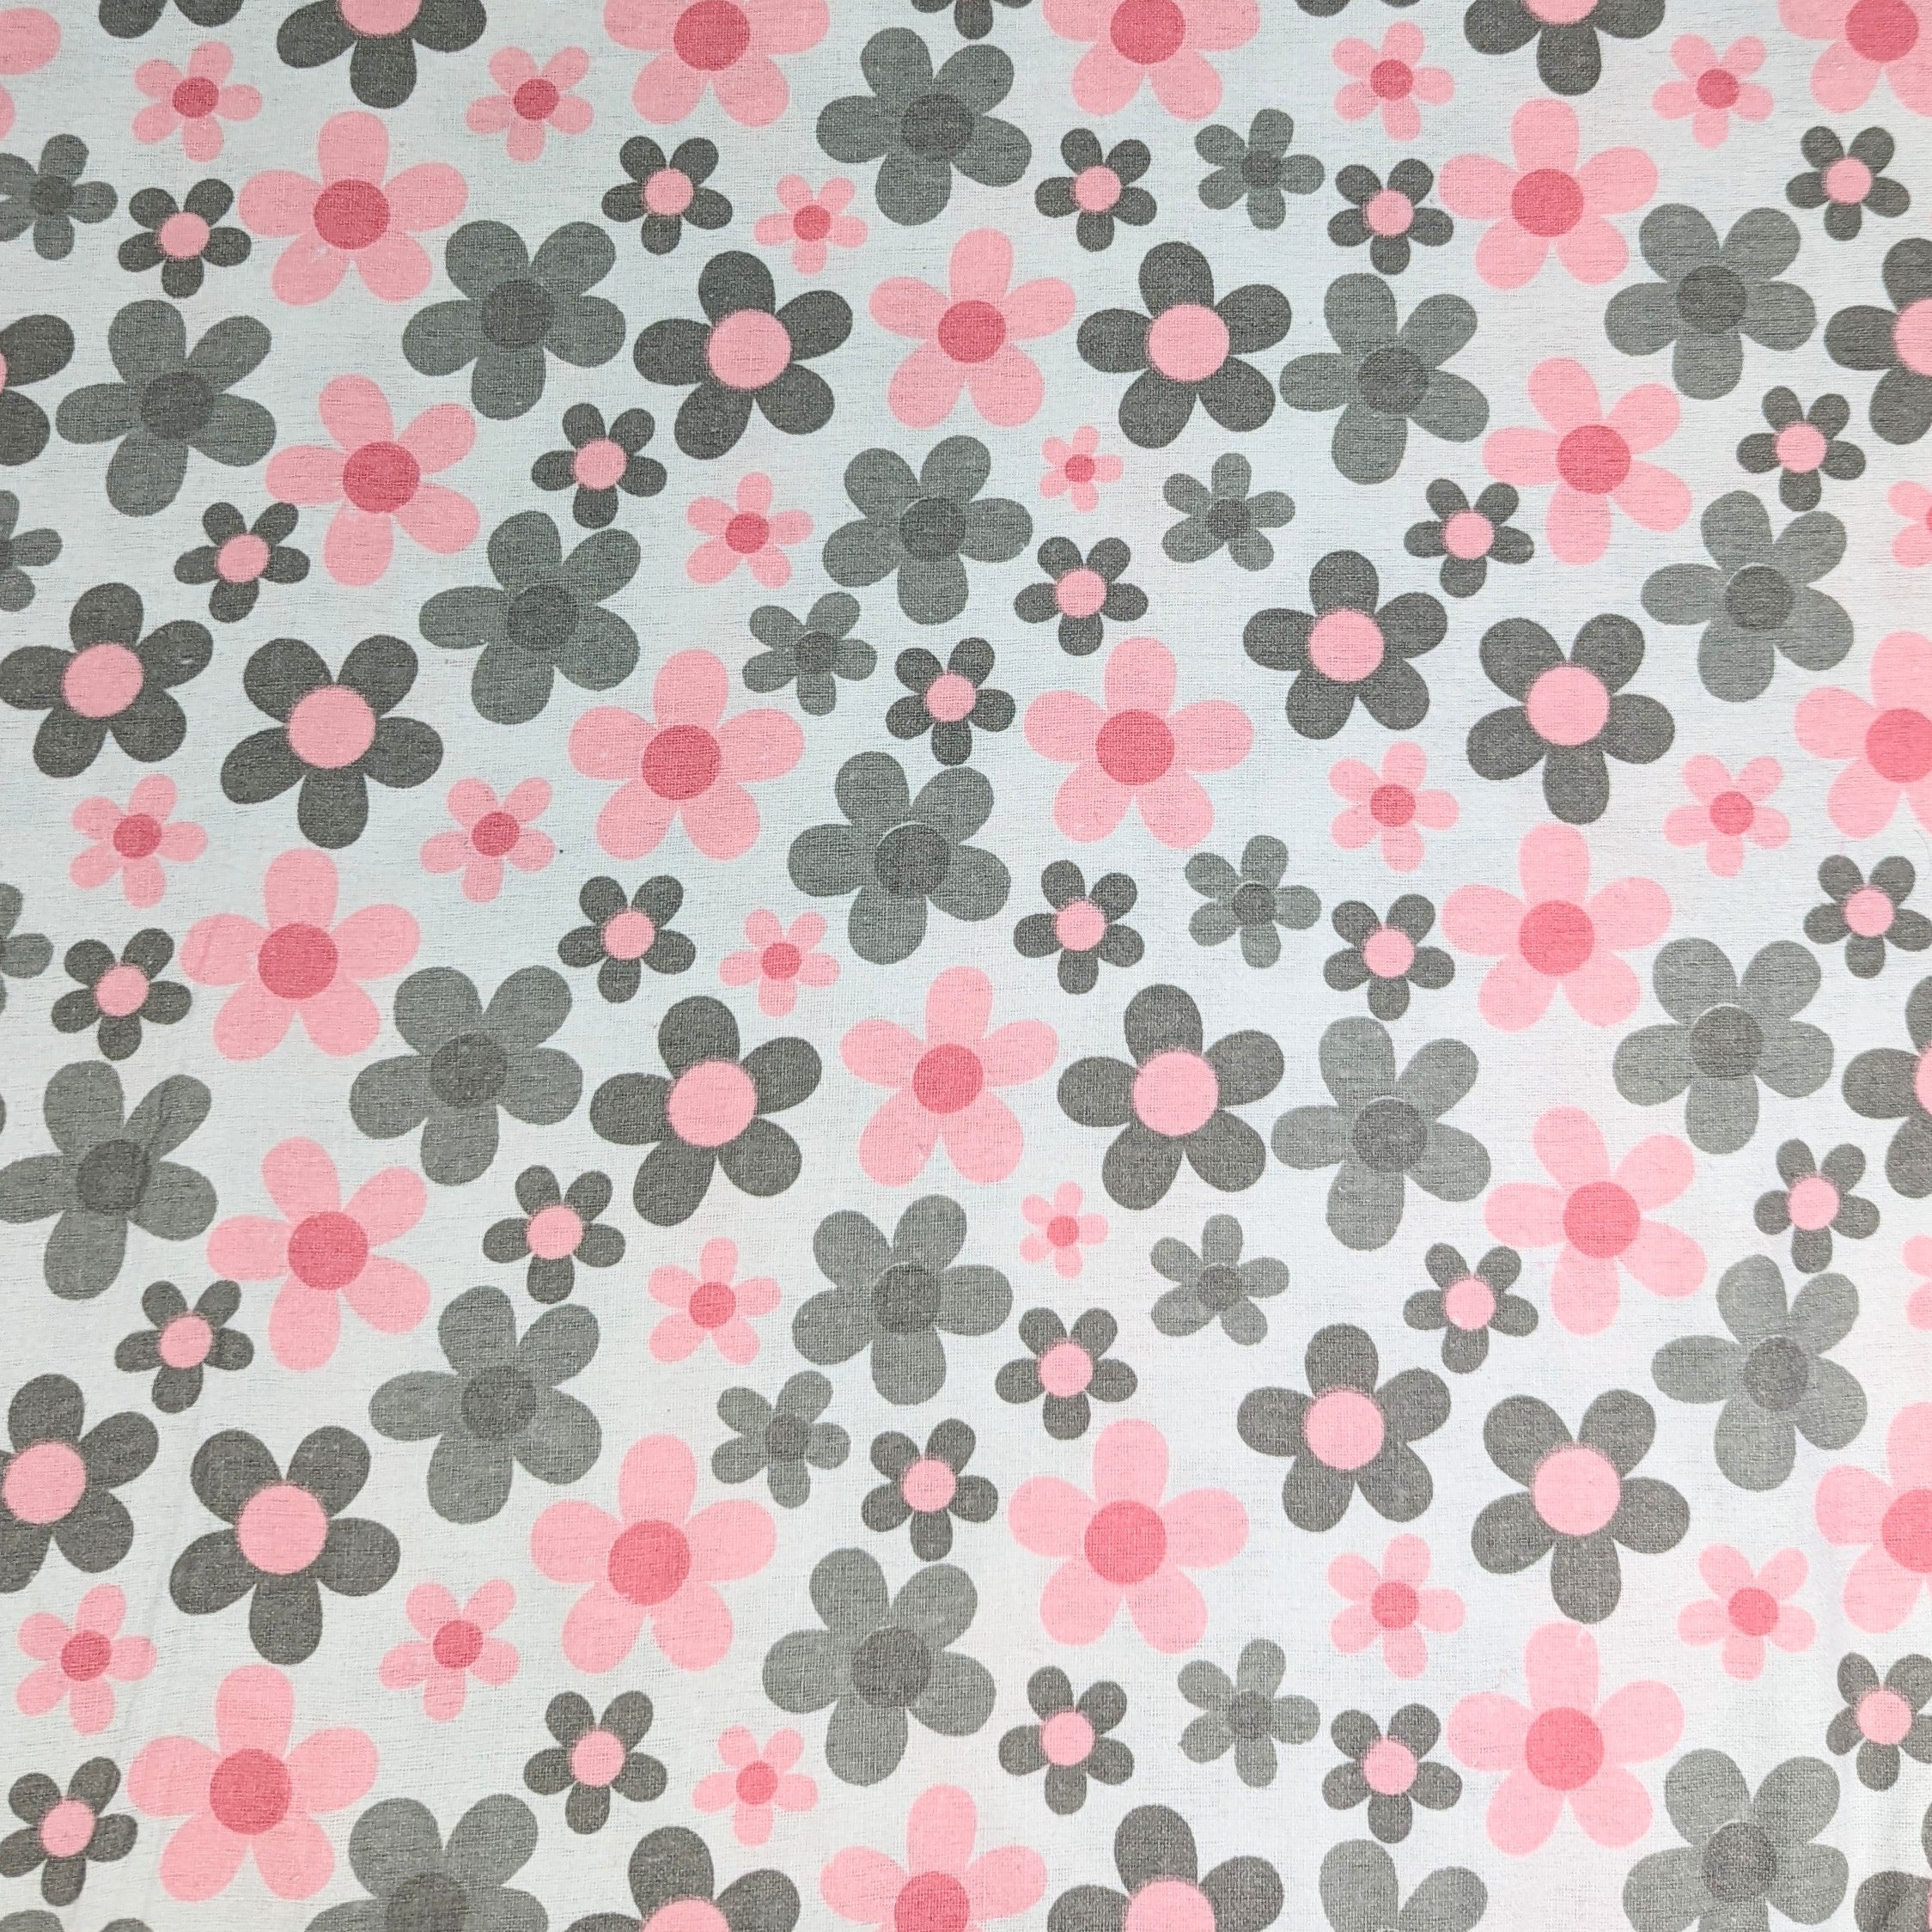 3 Metres Brushed Cotton Blend Fabric- Flower Power 55" Wide